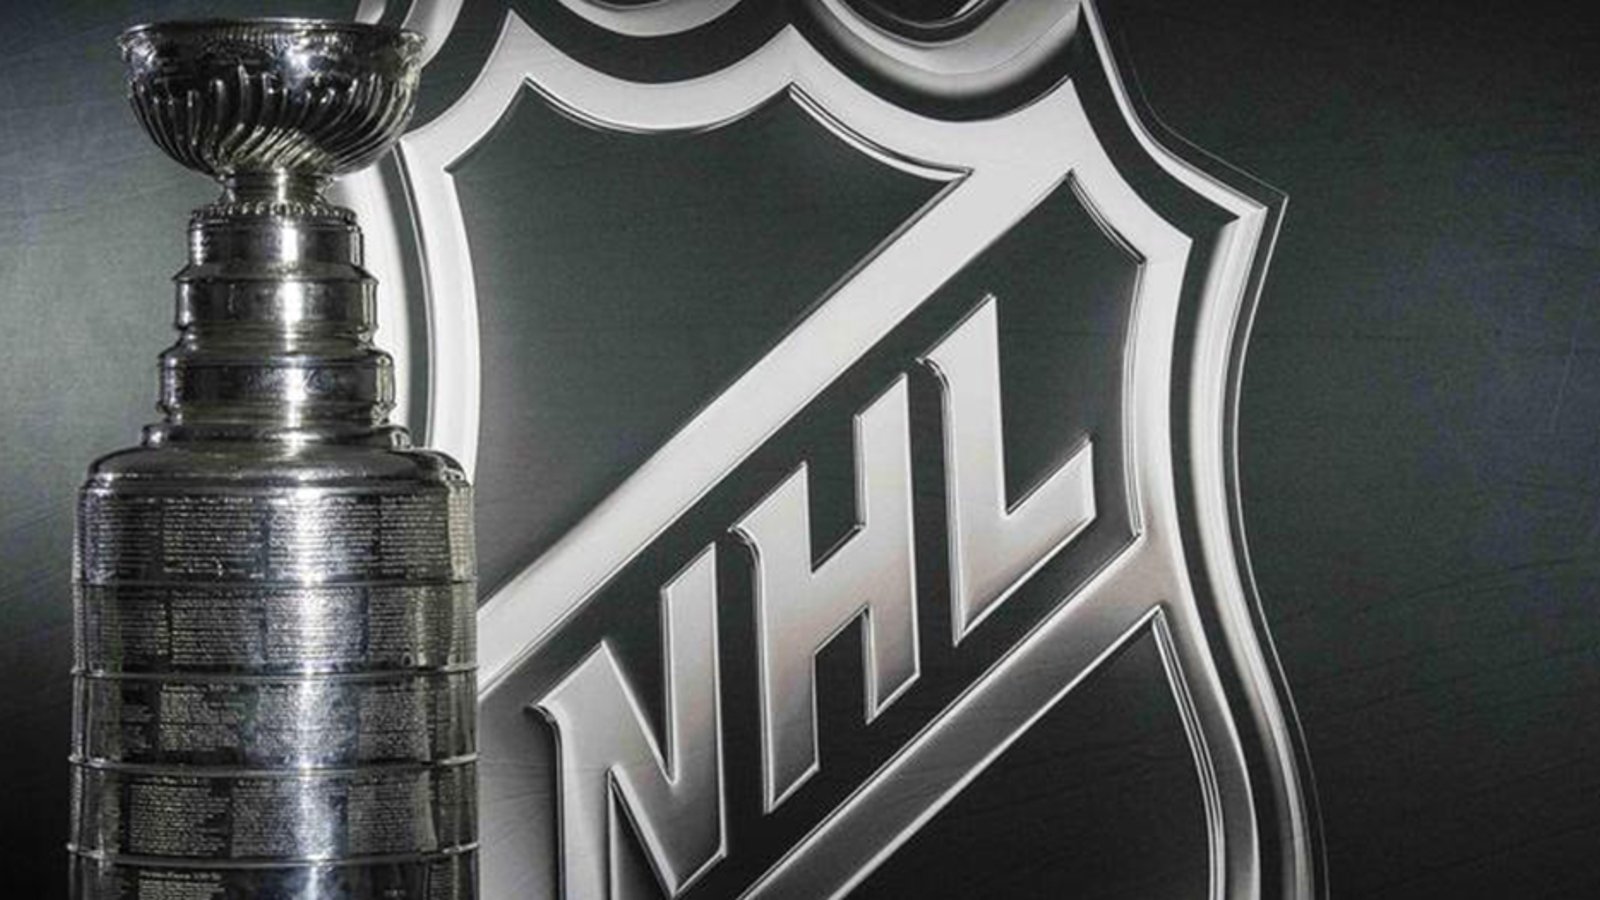 NHL's Return to Play Committee has made significant progress on new format.